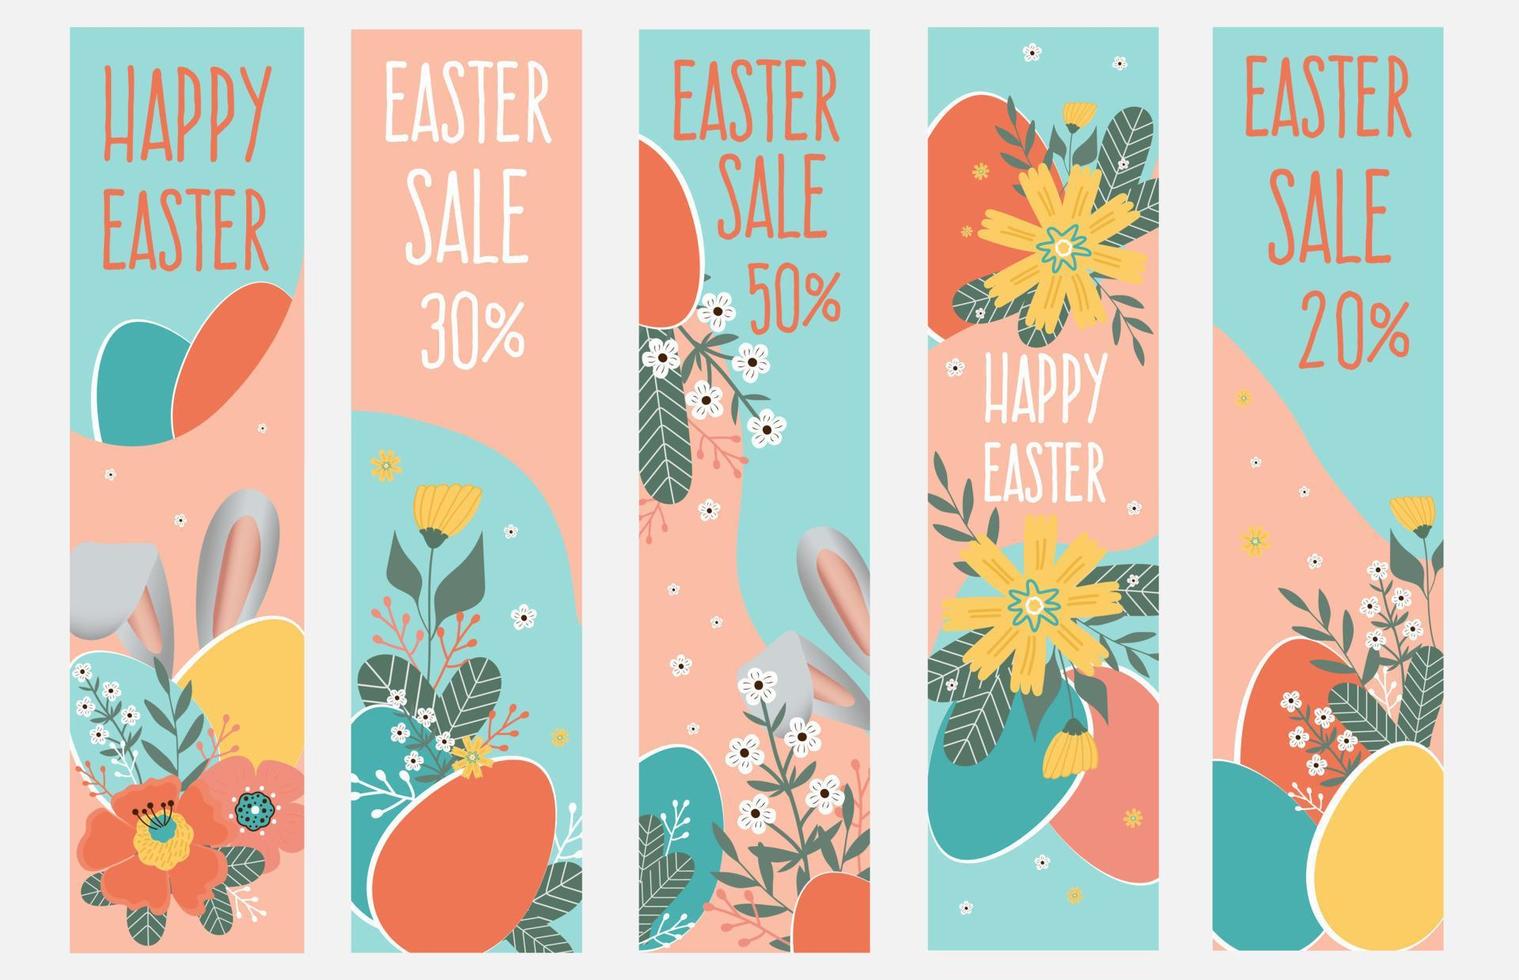 Happy easter sale banners. Spring flowers with the easter eggs and rabbit ears on pink and blue background. vector